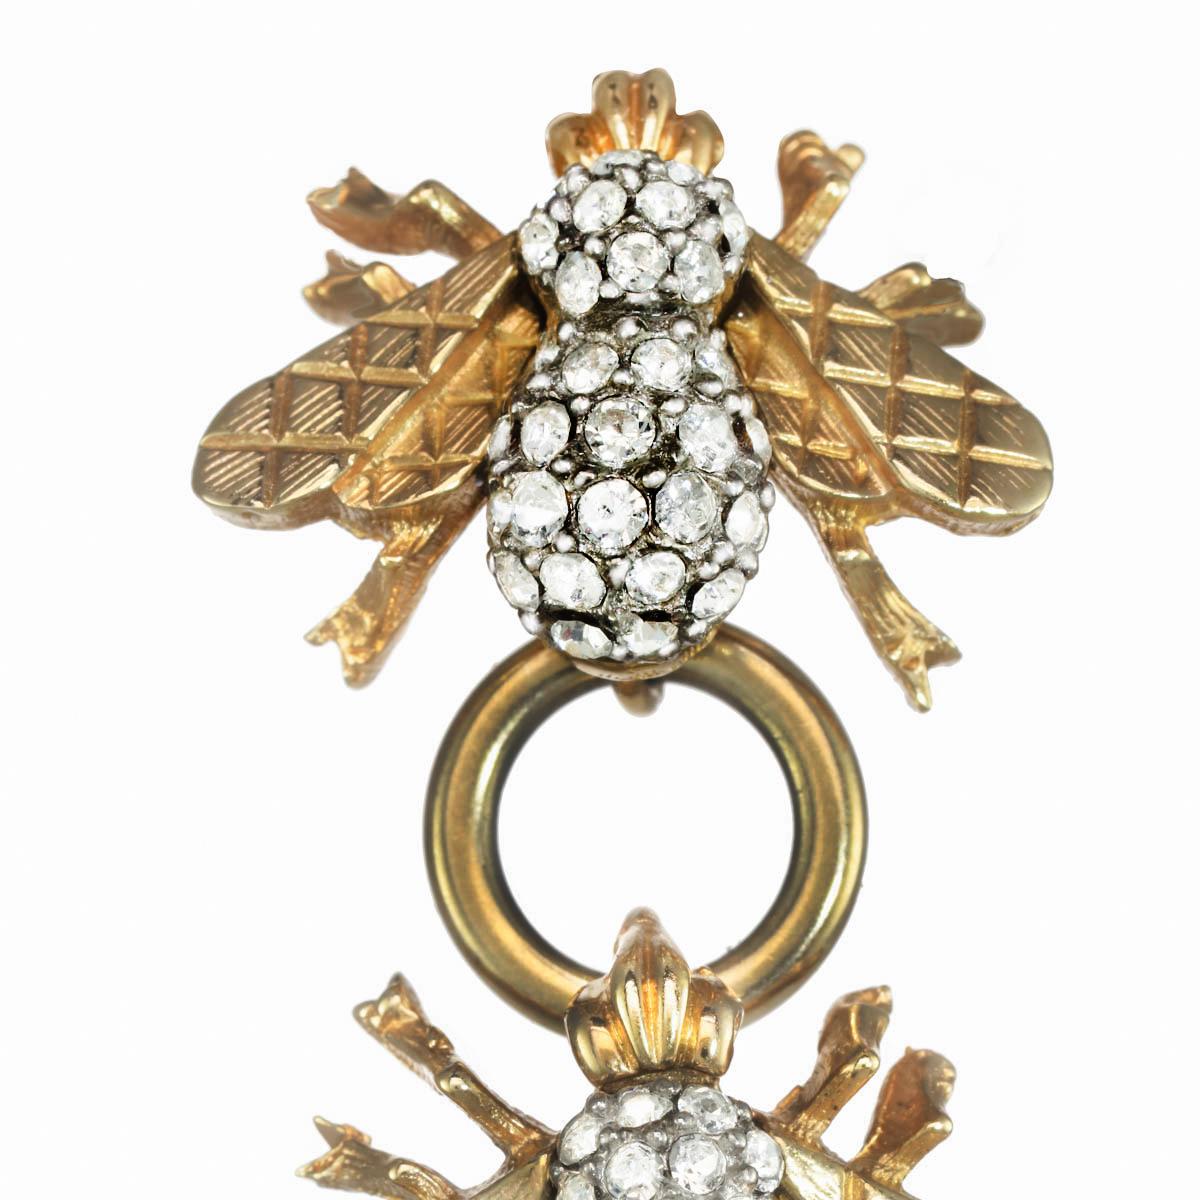 Four CINER heritage bees, with polished gold connectors, encompasses this gorgeous linear statement earring. With beautifully detailed gold quilted wings and illuminating Swarovski crystal rhinestone accents, these earrings are Carolyne's take on an